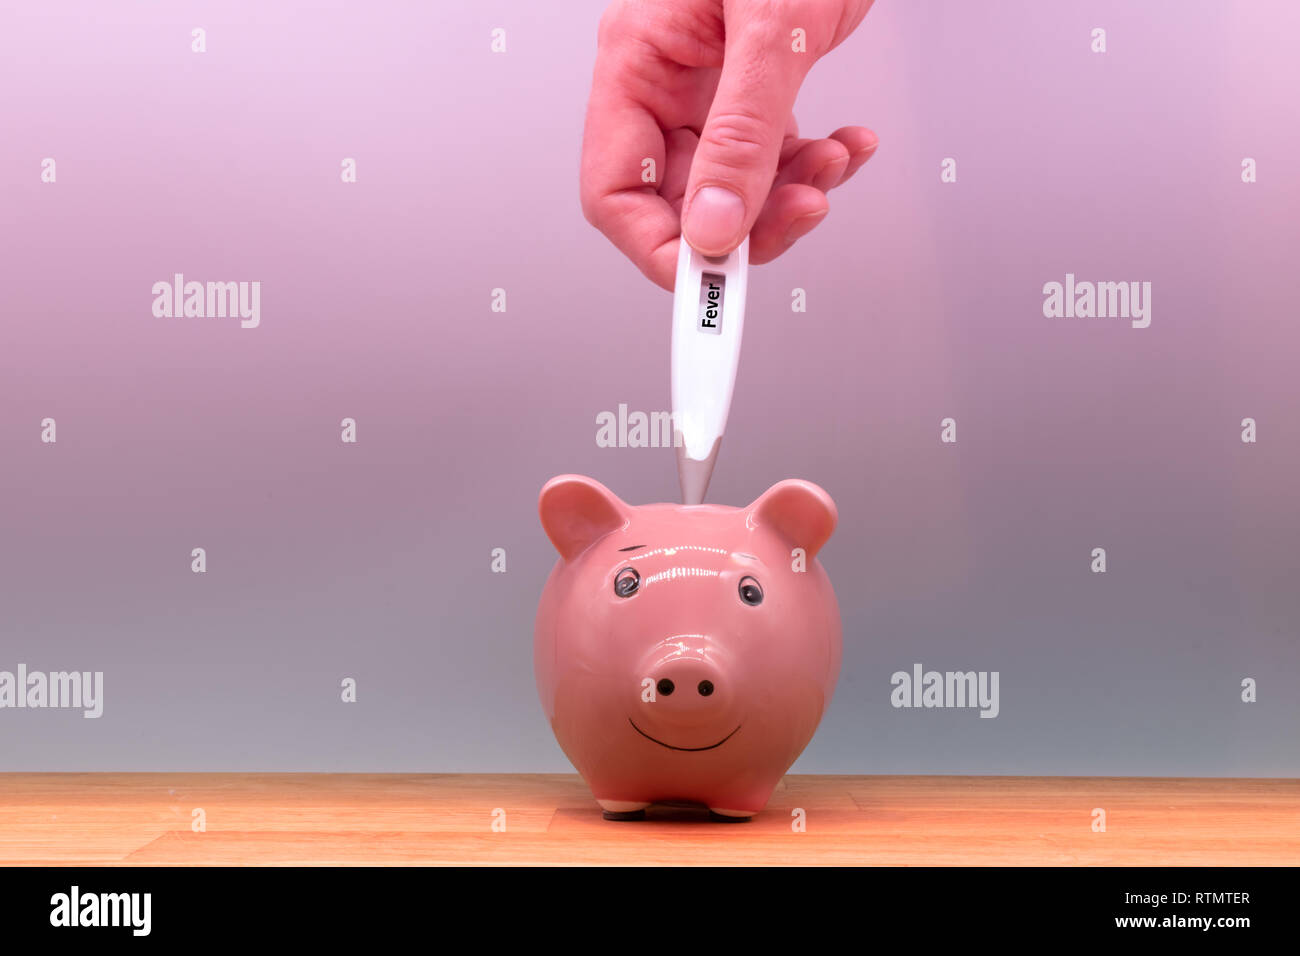 Symbol for swine flu or Symbol for having no money. Hand holds a thermometer to a piggy bank. Stock Photo